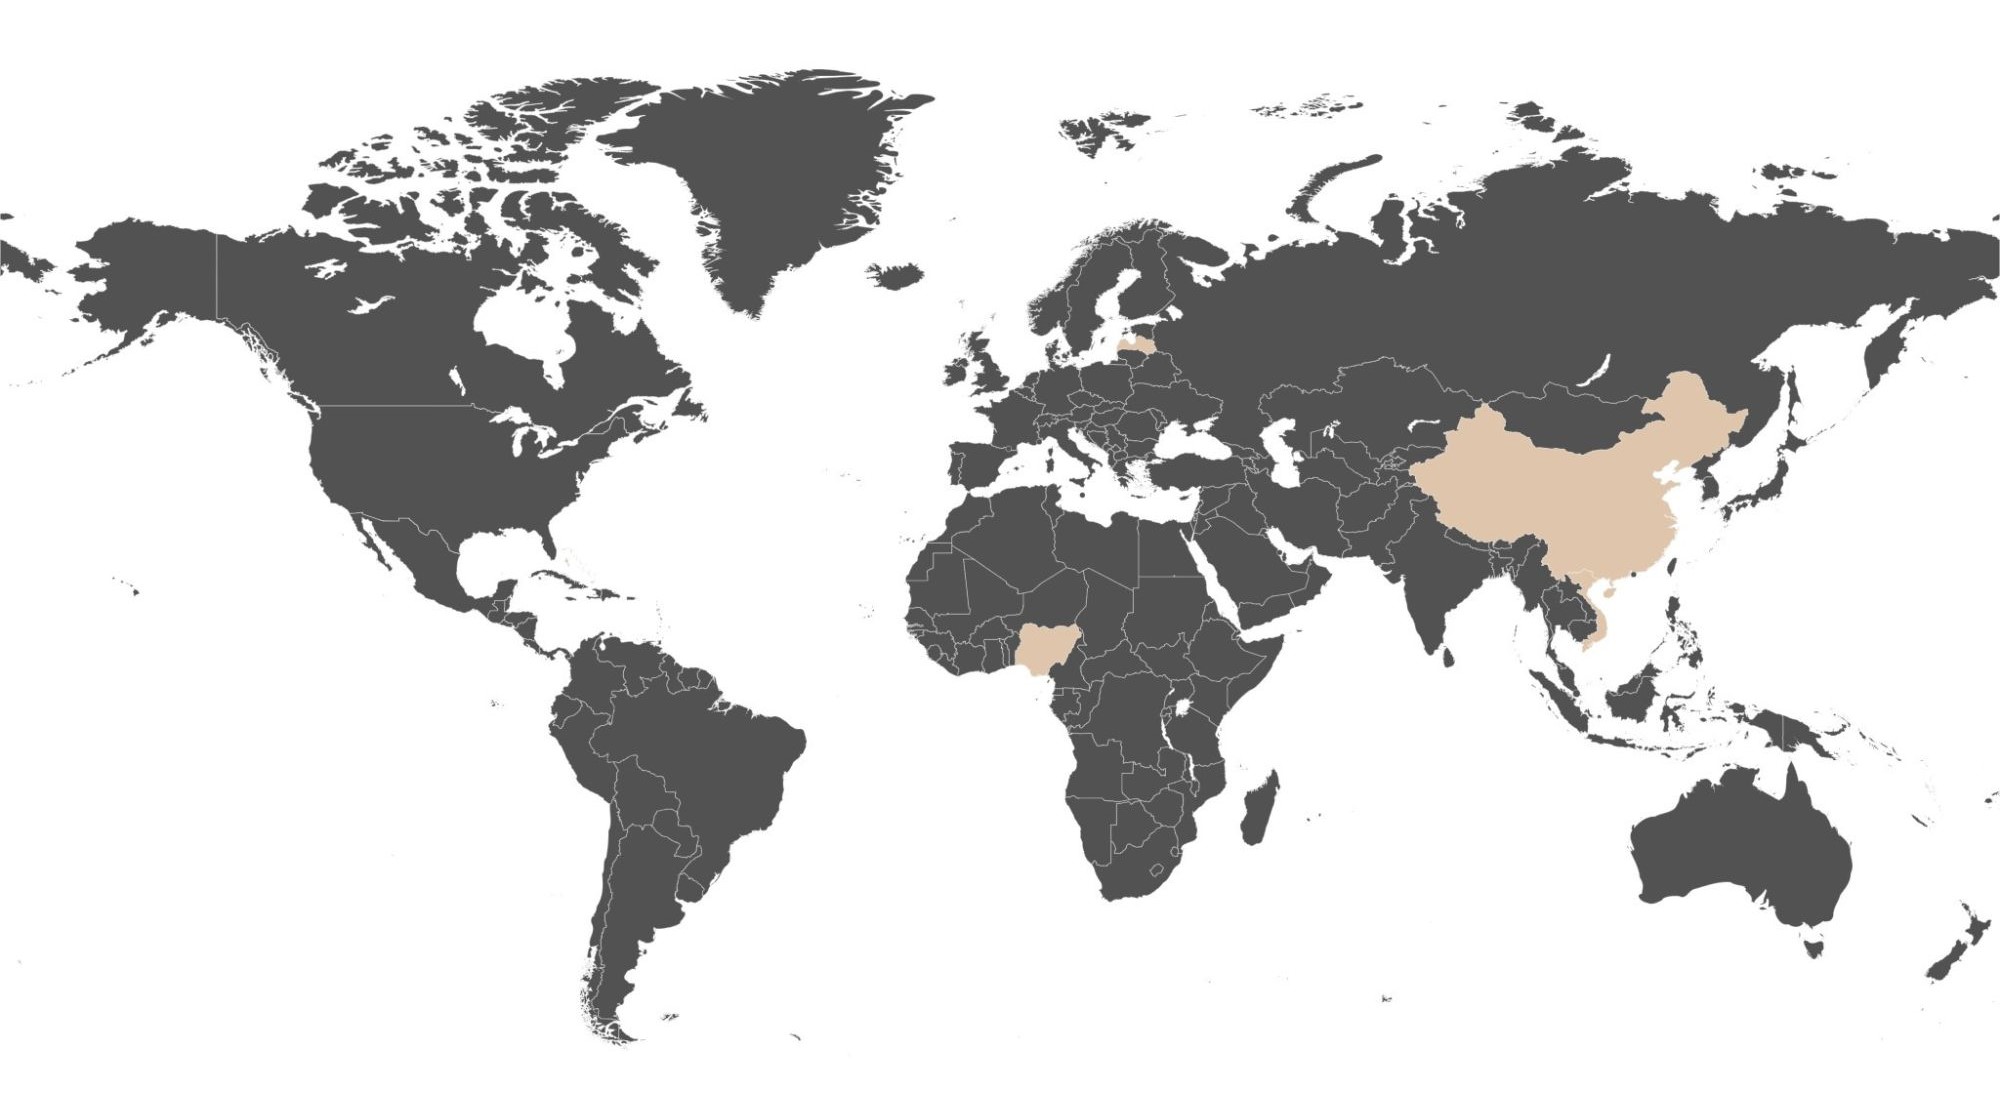 Illustration of a Colored map of world ec holdings contact us